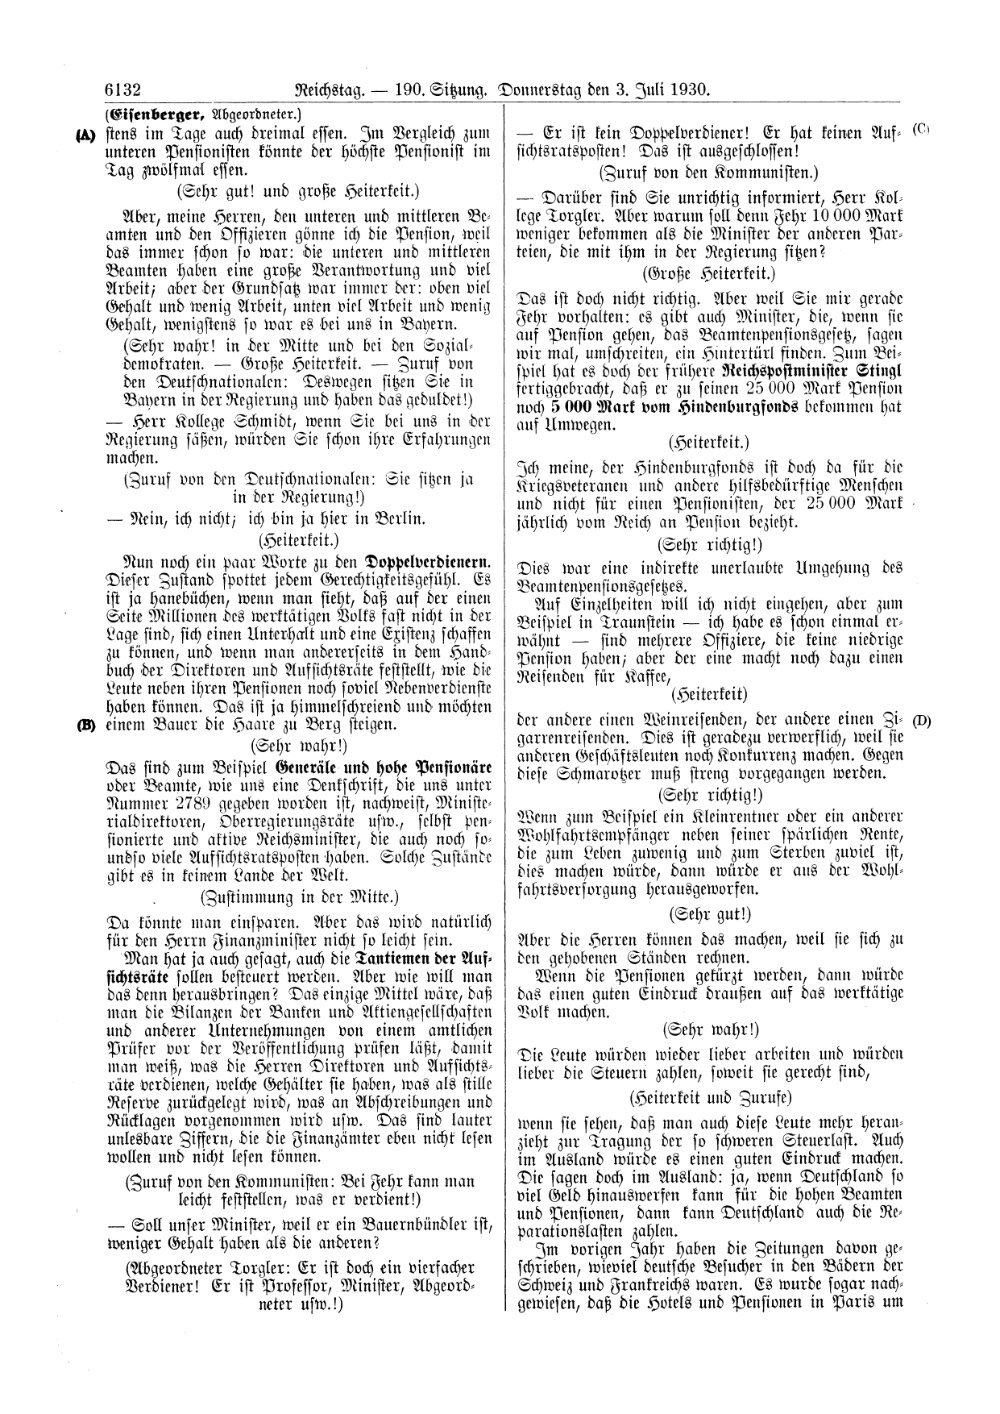 Scan of page 6132